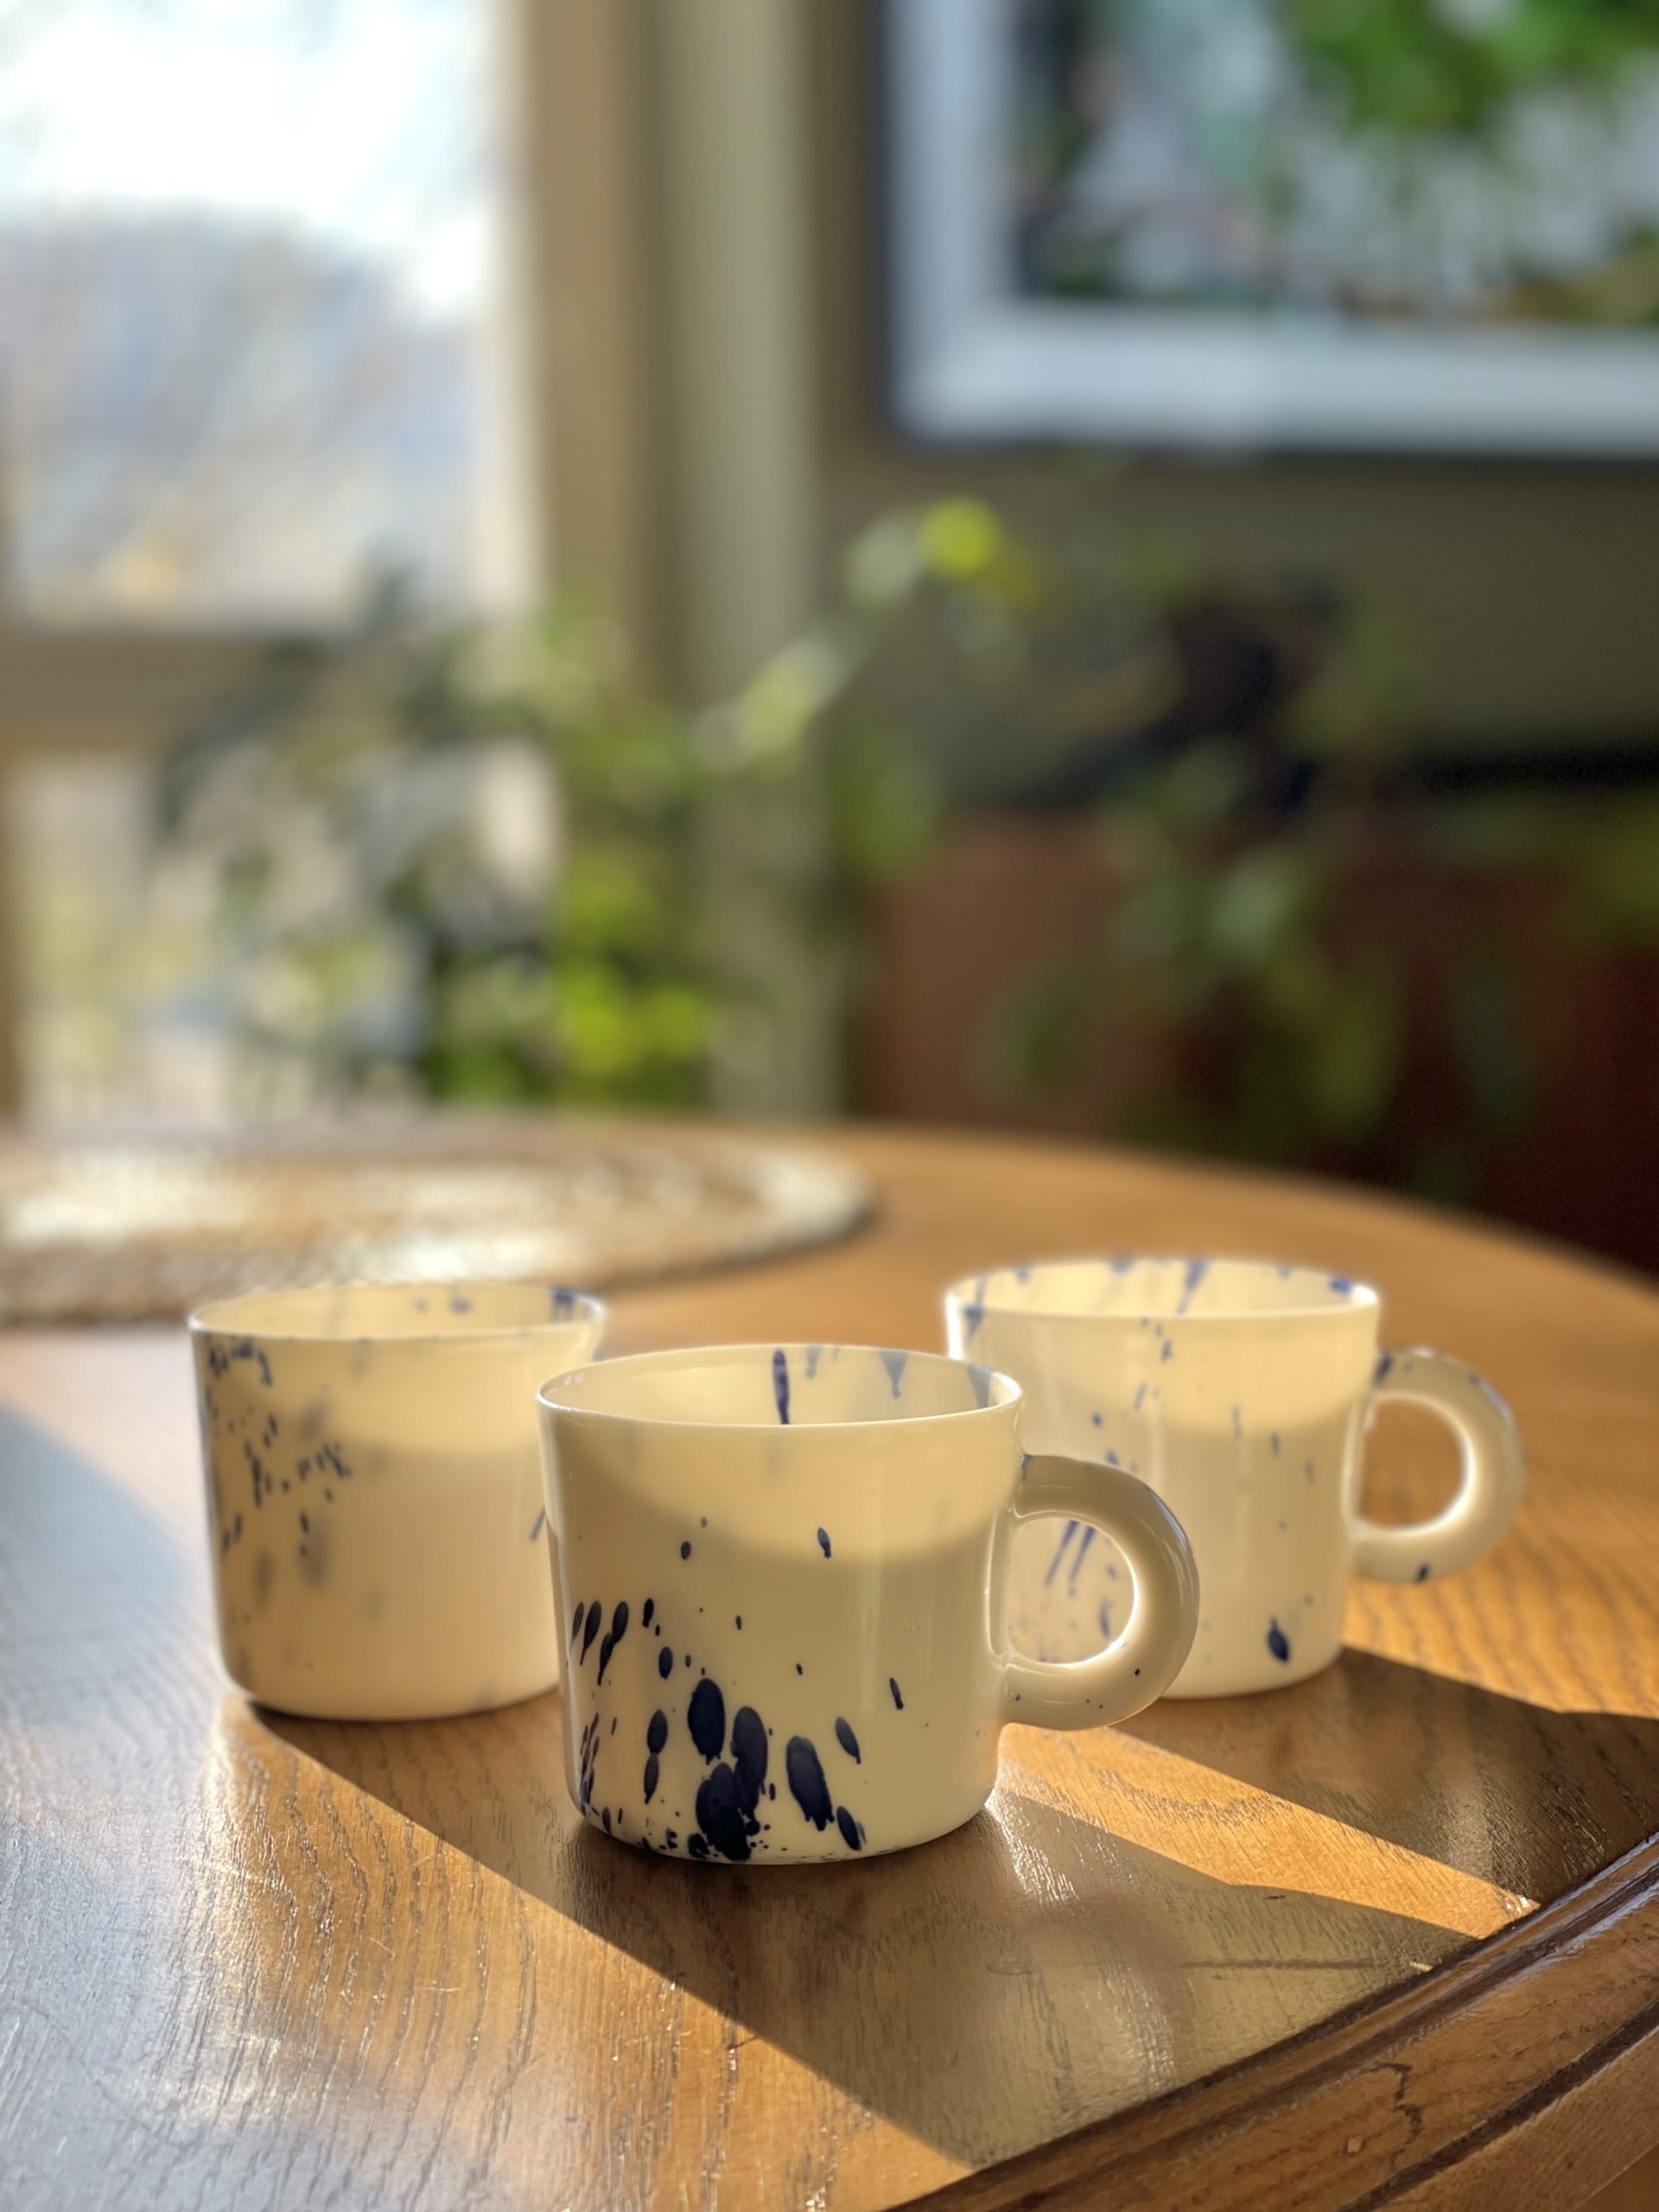 Porcelain cappuccino cup with blue patterns